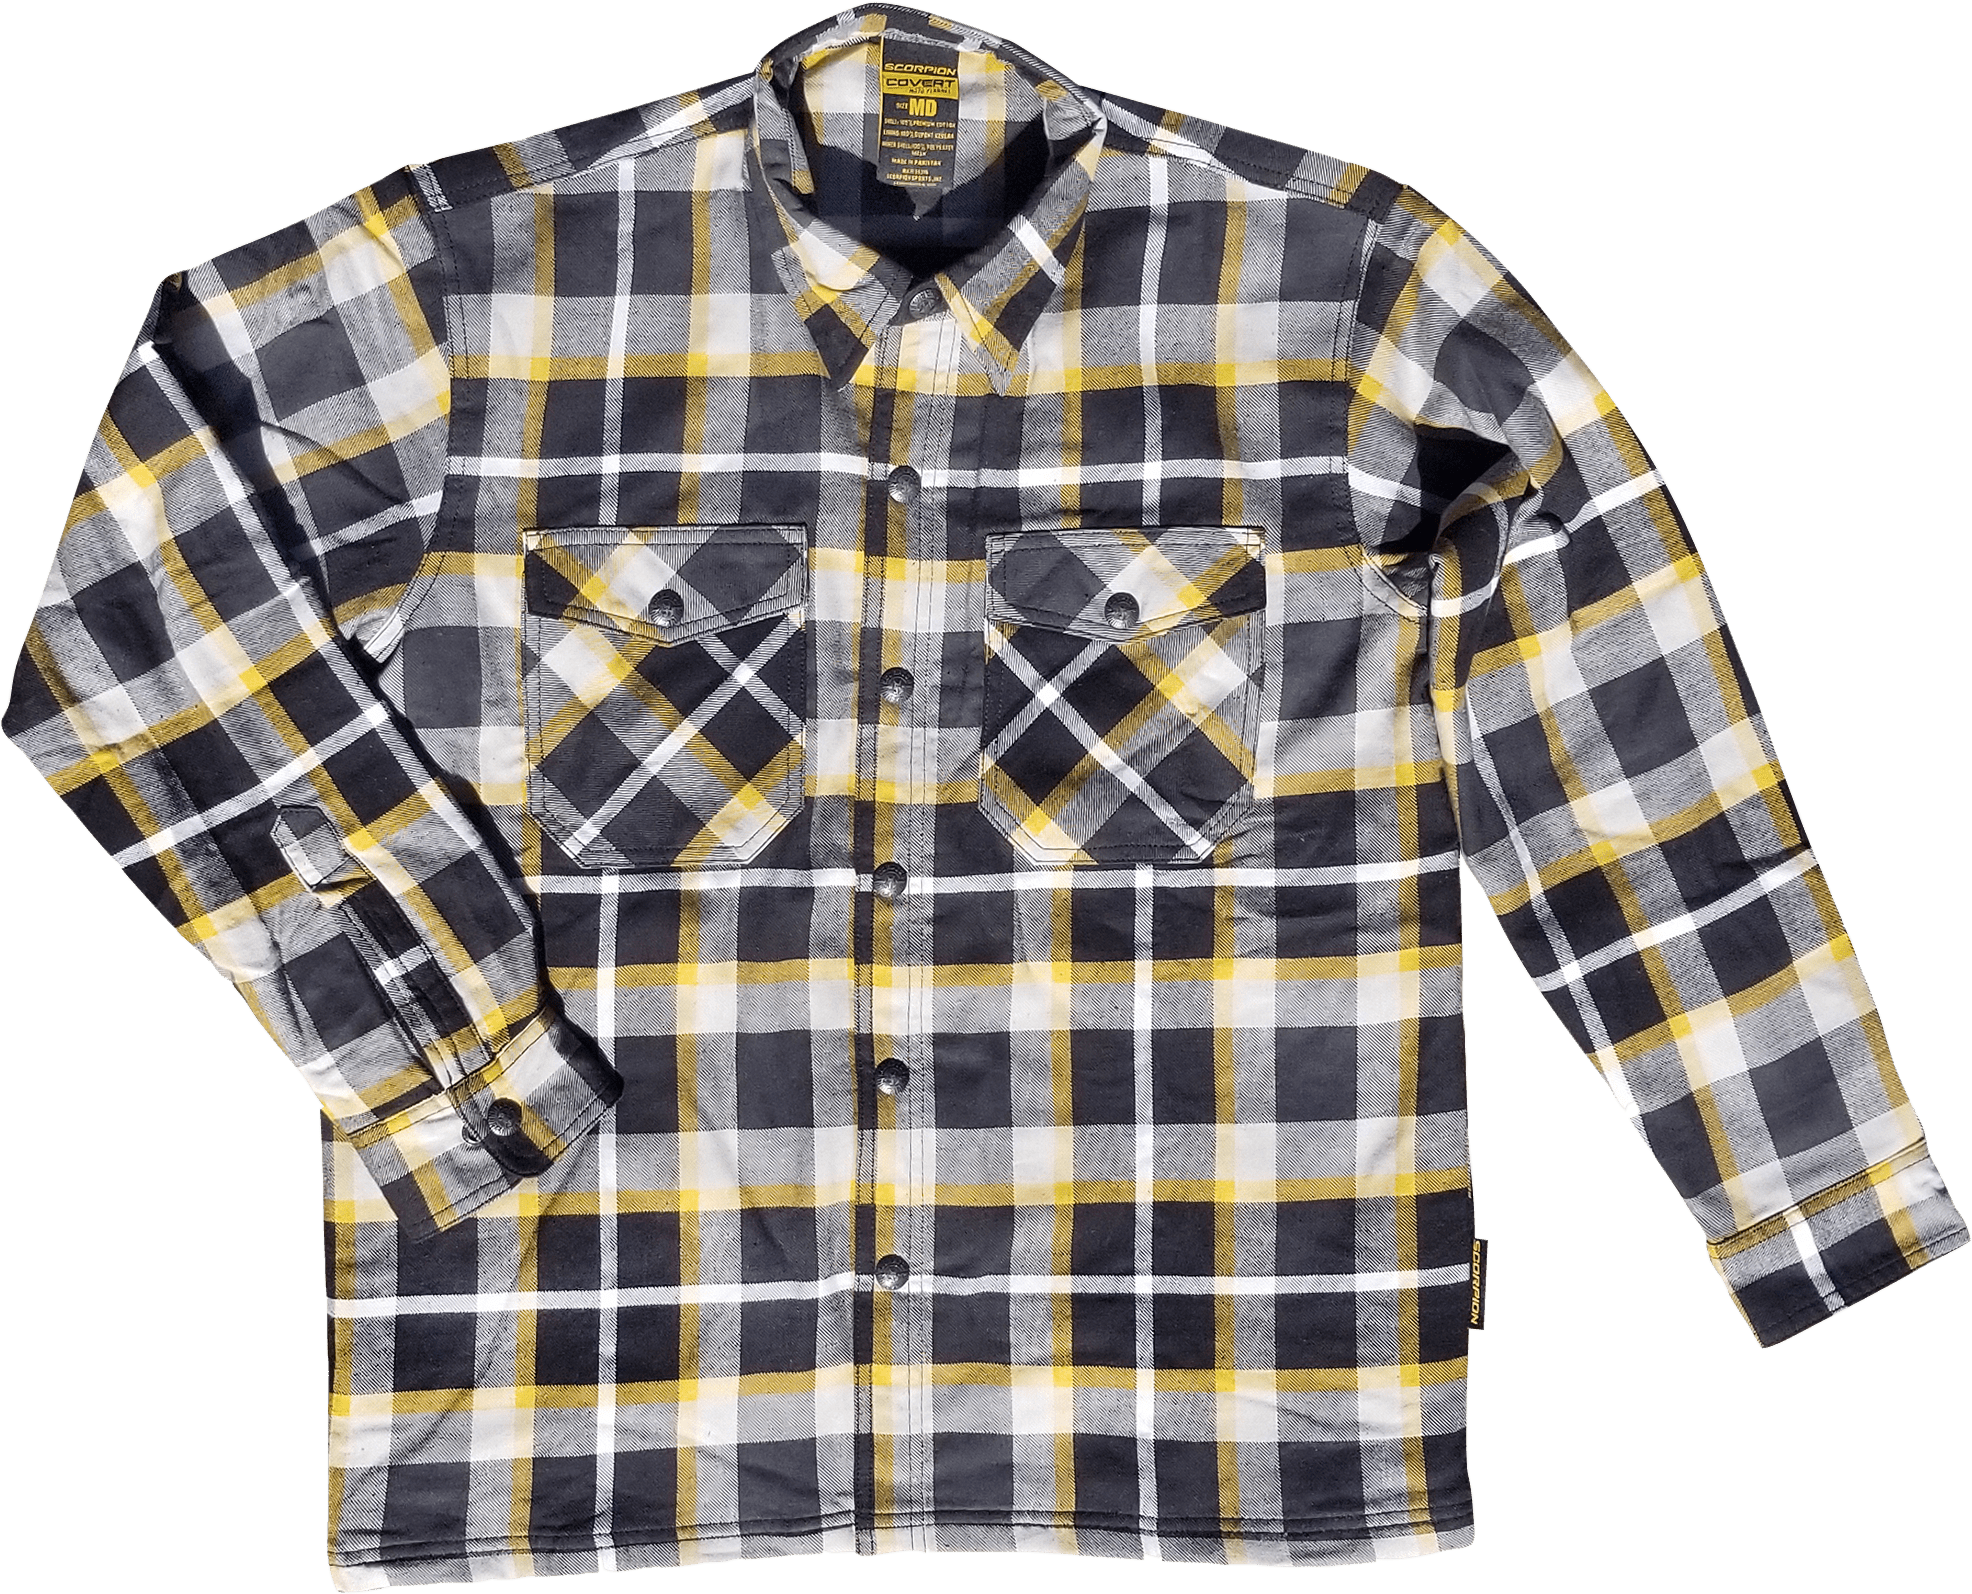 Western Powersports Jacket White/Yellow / 2X Covert Flannel By Scorpion Exo 13803-7